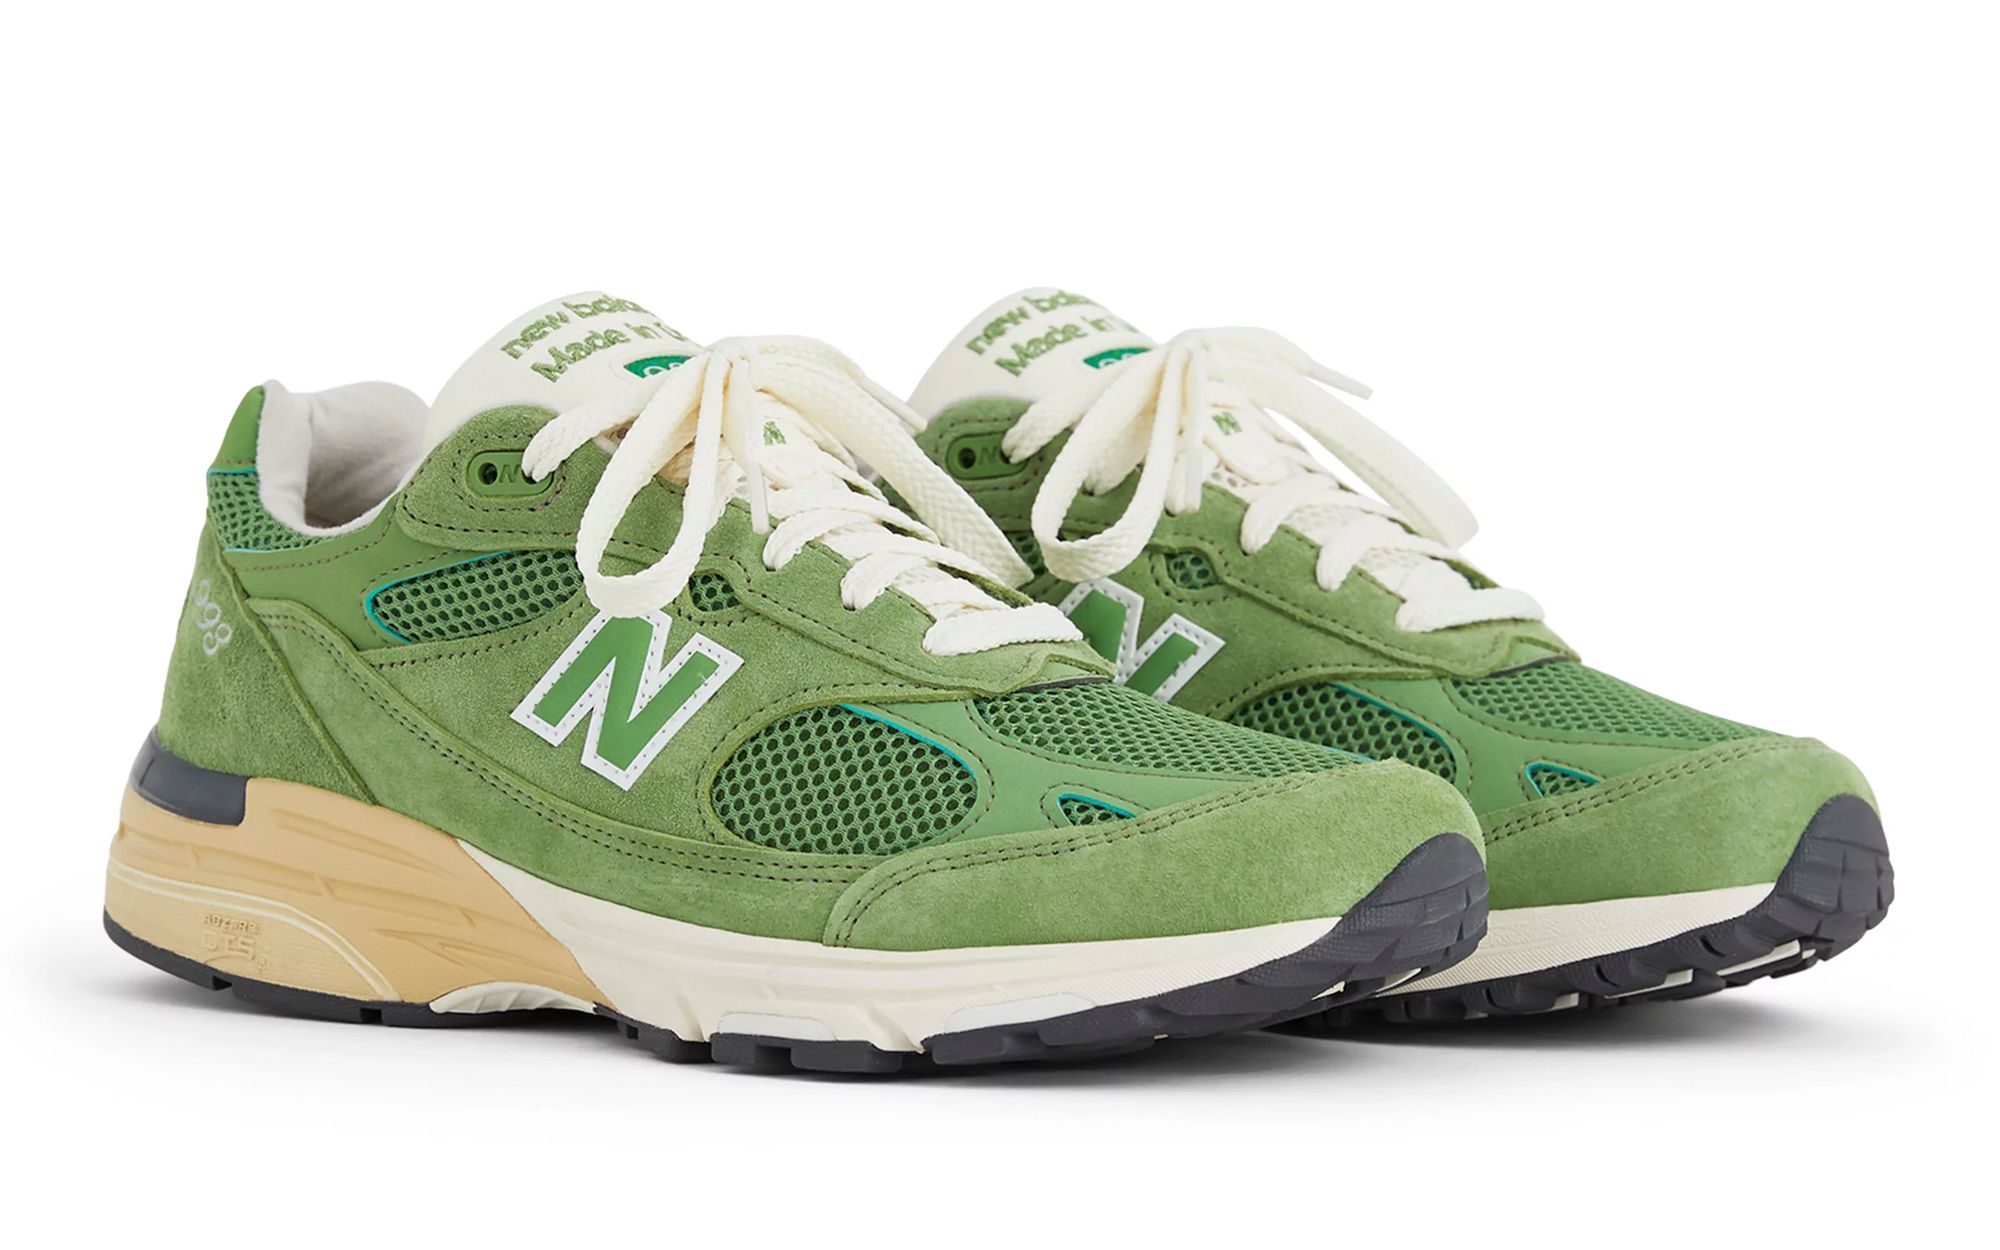 The New Balance 993 Sea Salt/Black Releases May 30 | House of Heat°